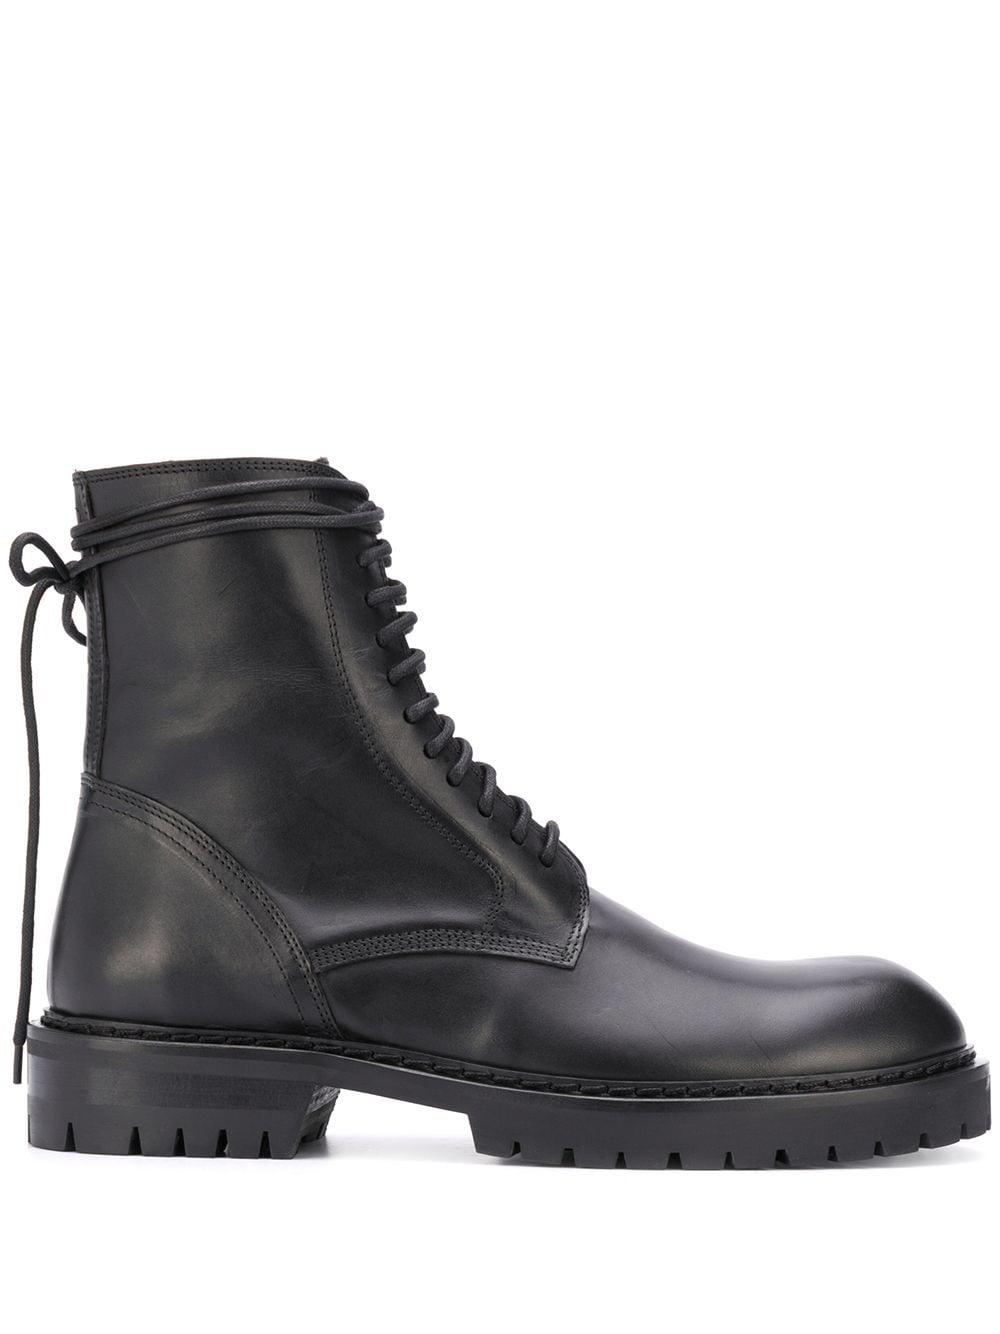 Ann Demeulemeester Leather Lace Up Biker Boots in Black for Men - Lyst